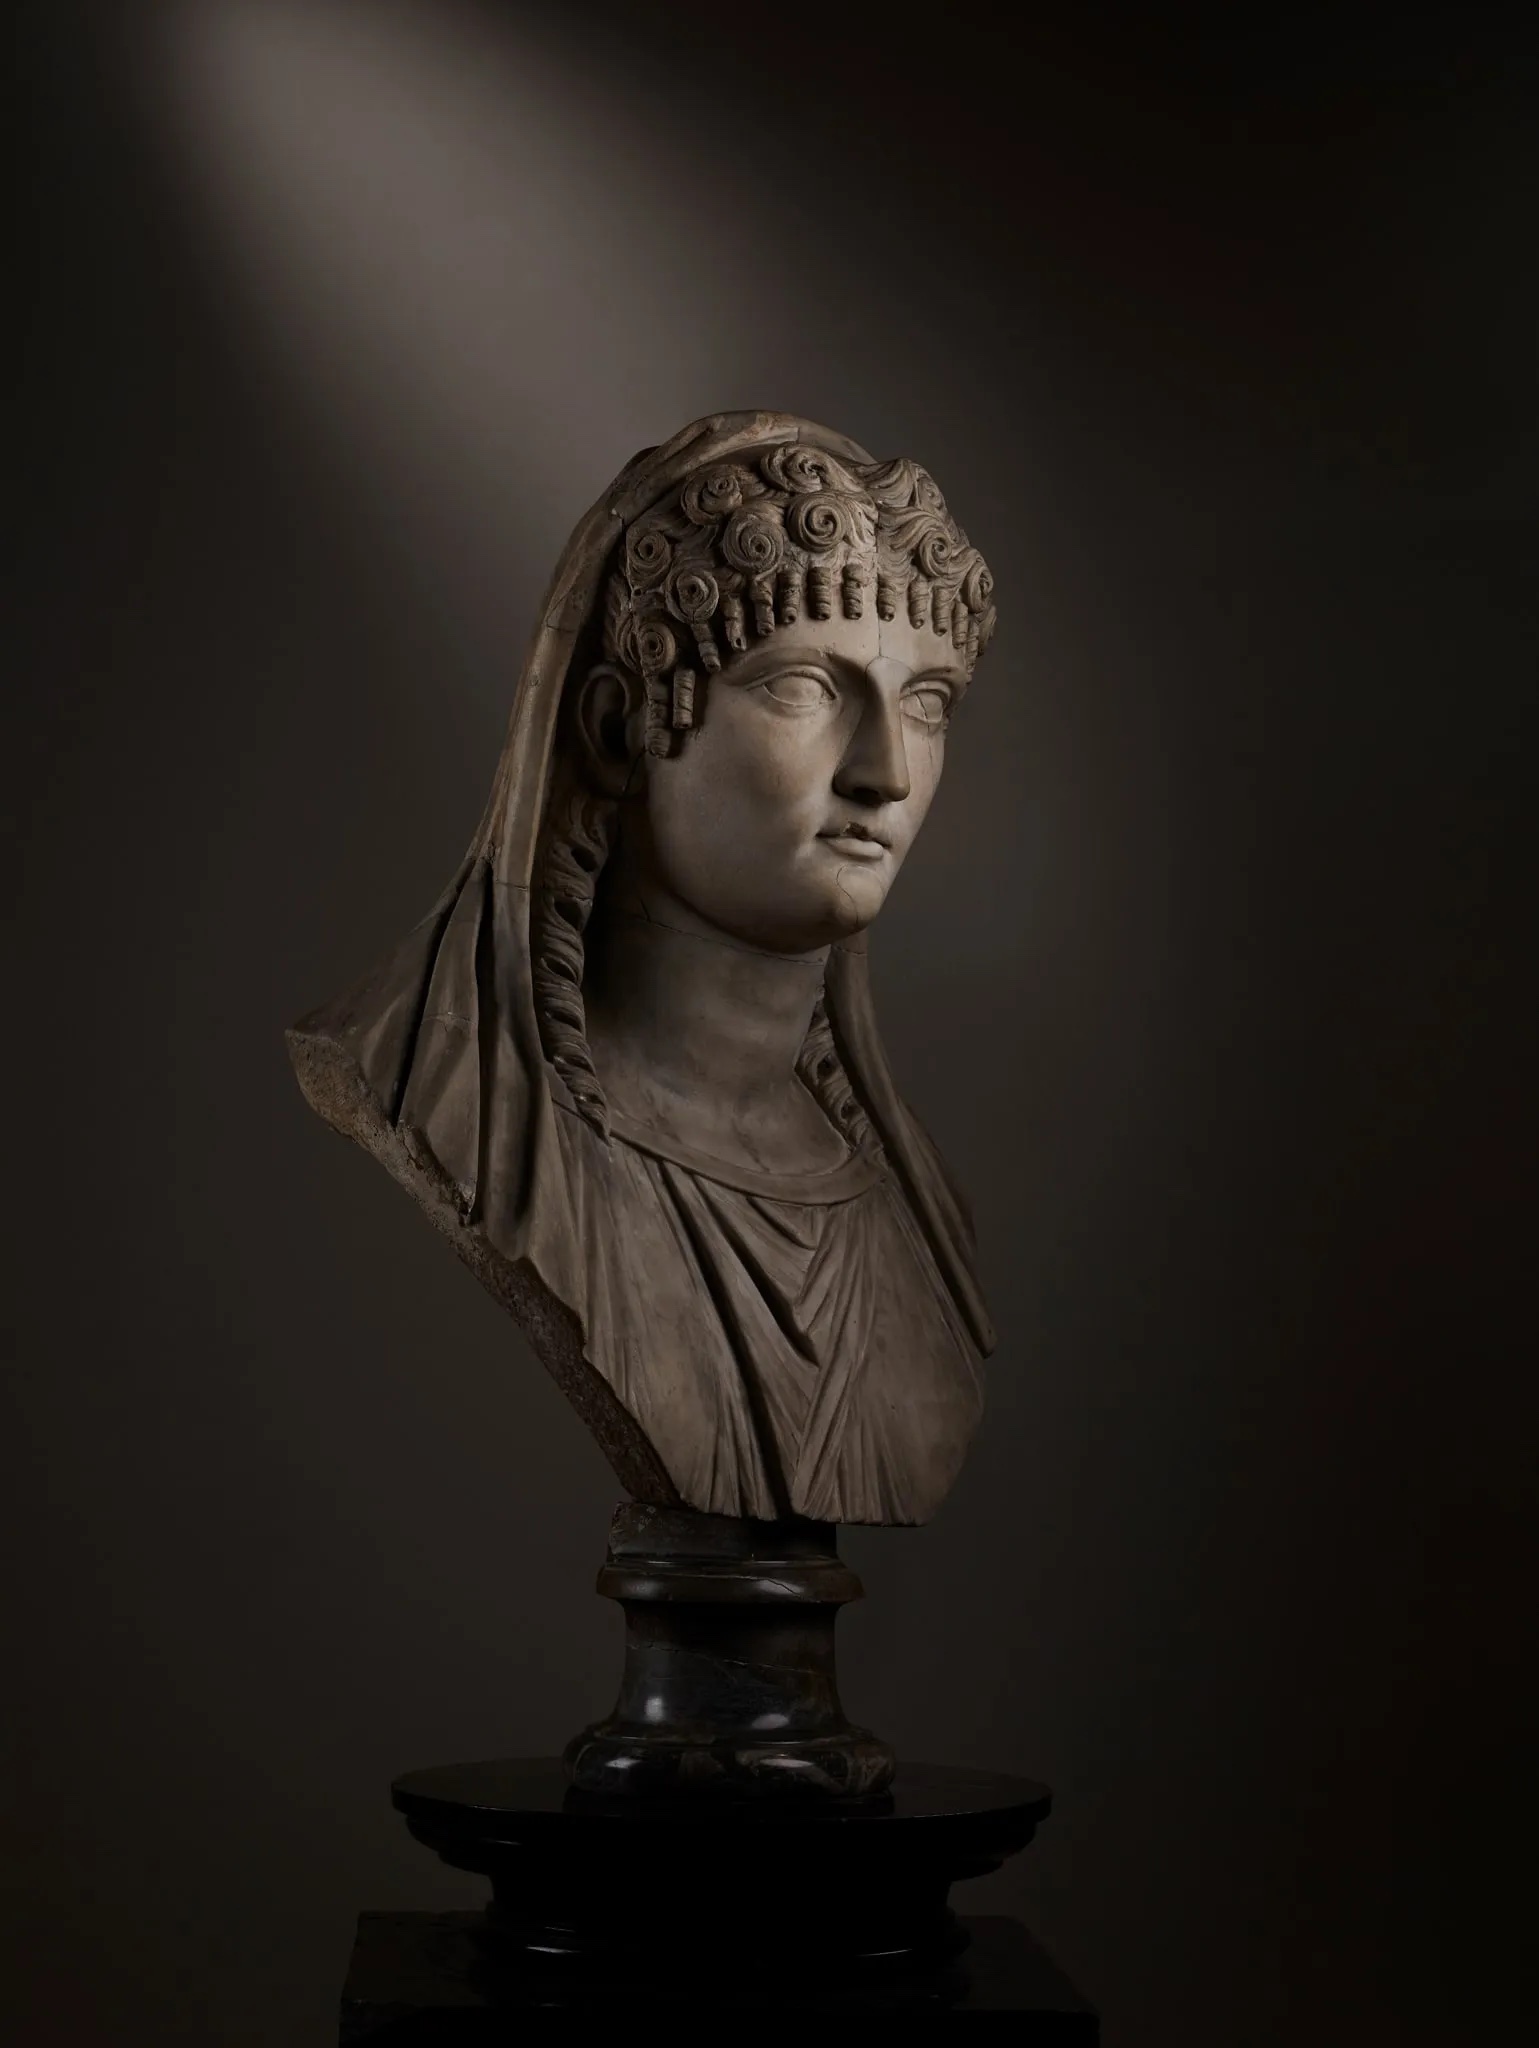 Roman Trajanic marble bust of Pompeia Plotina, which hammered for £600,000 ($767,360) and sold for £780,000 ($988,120) with buyer’s premium at Lyon & Turnbull.